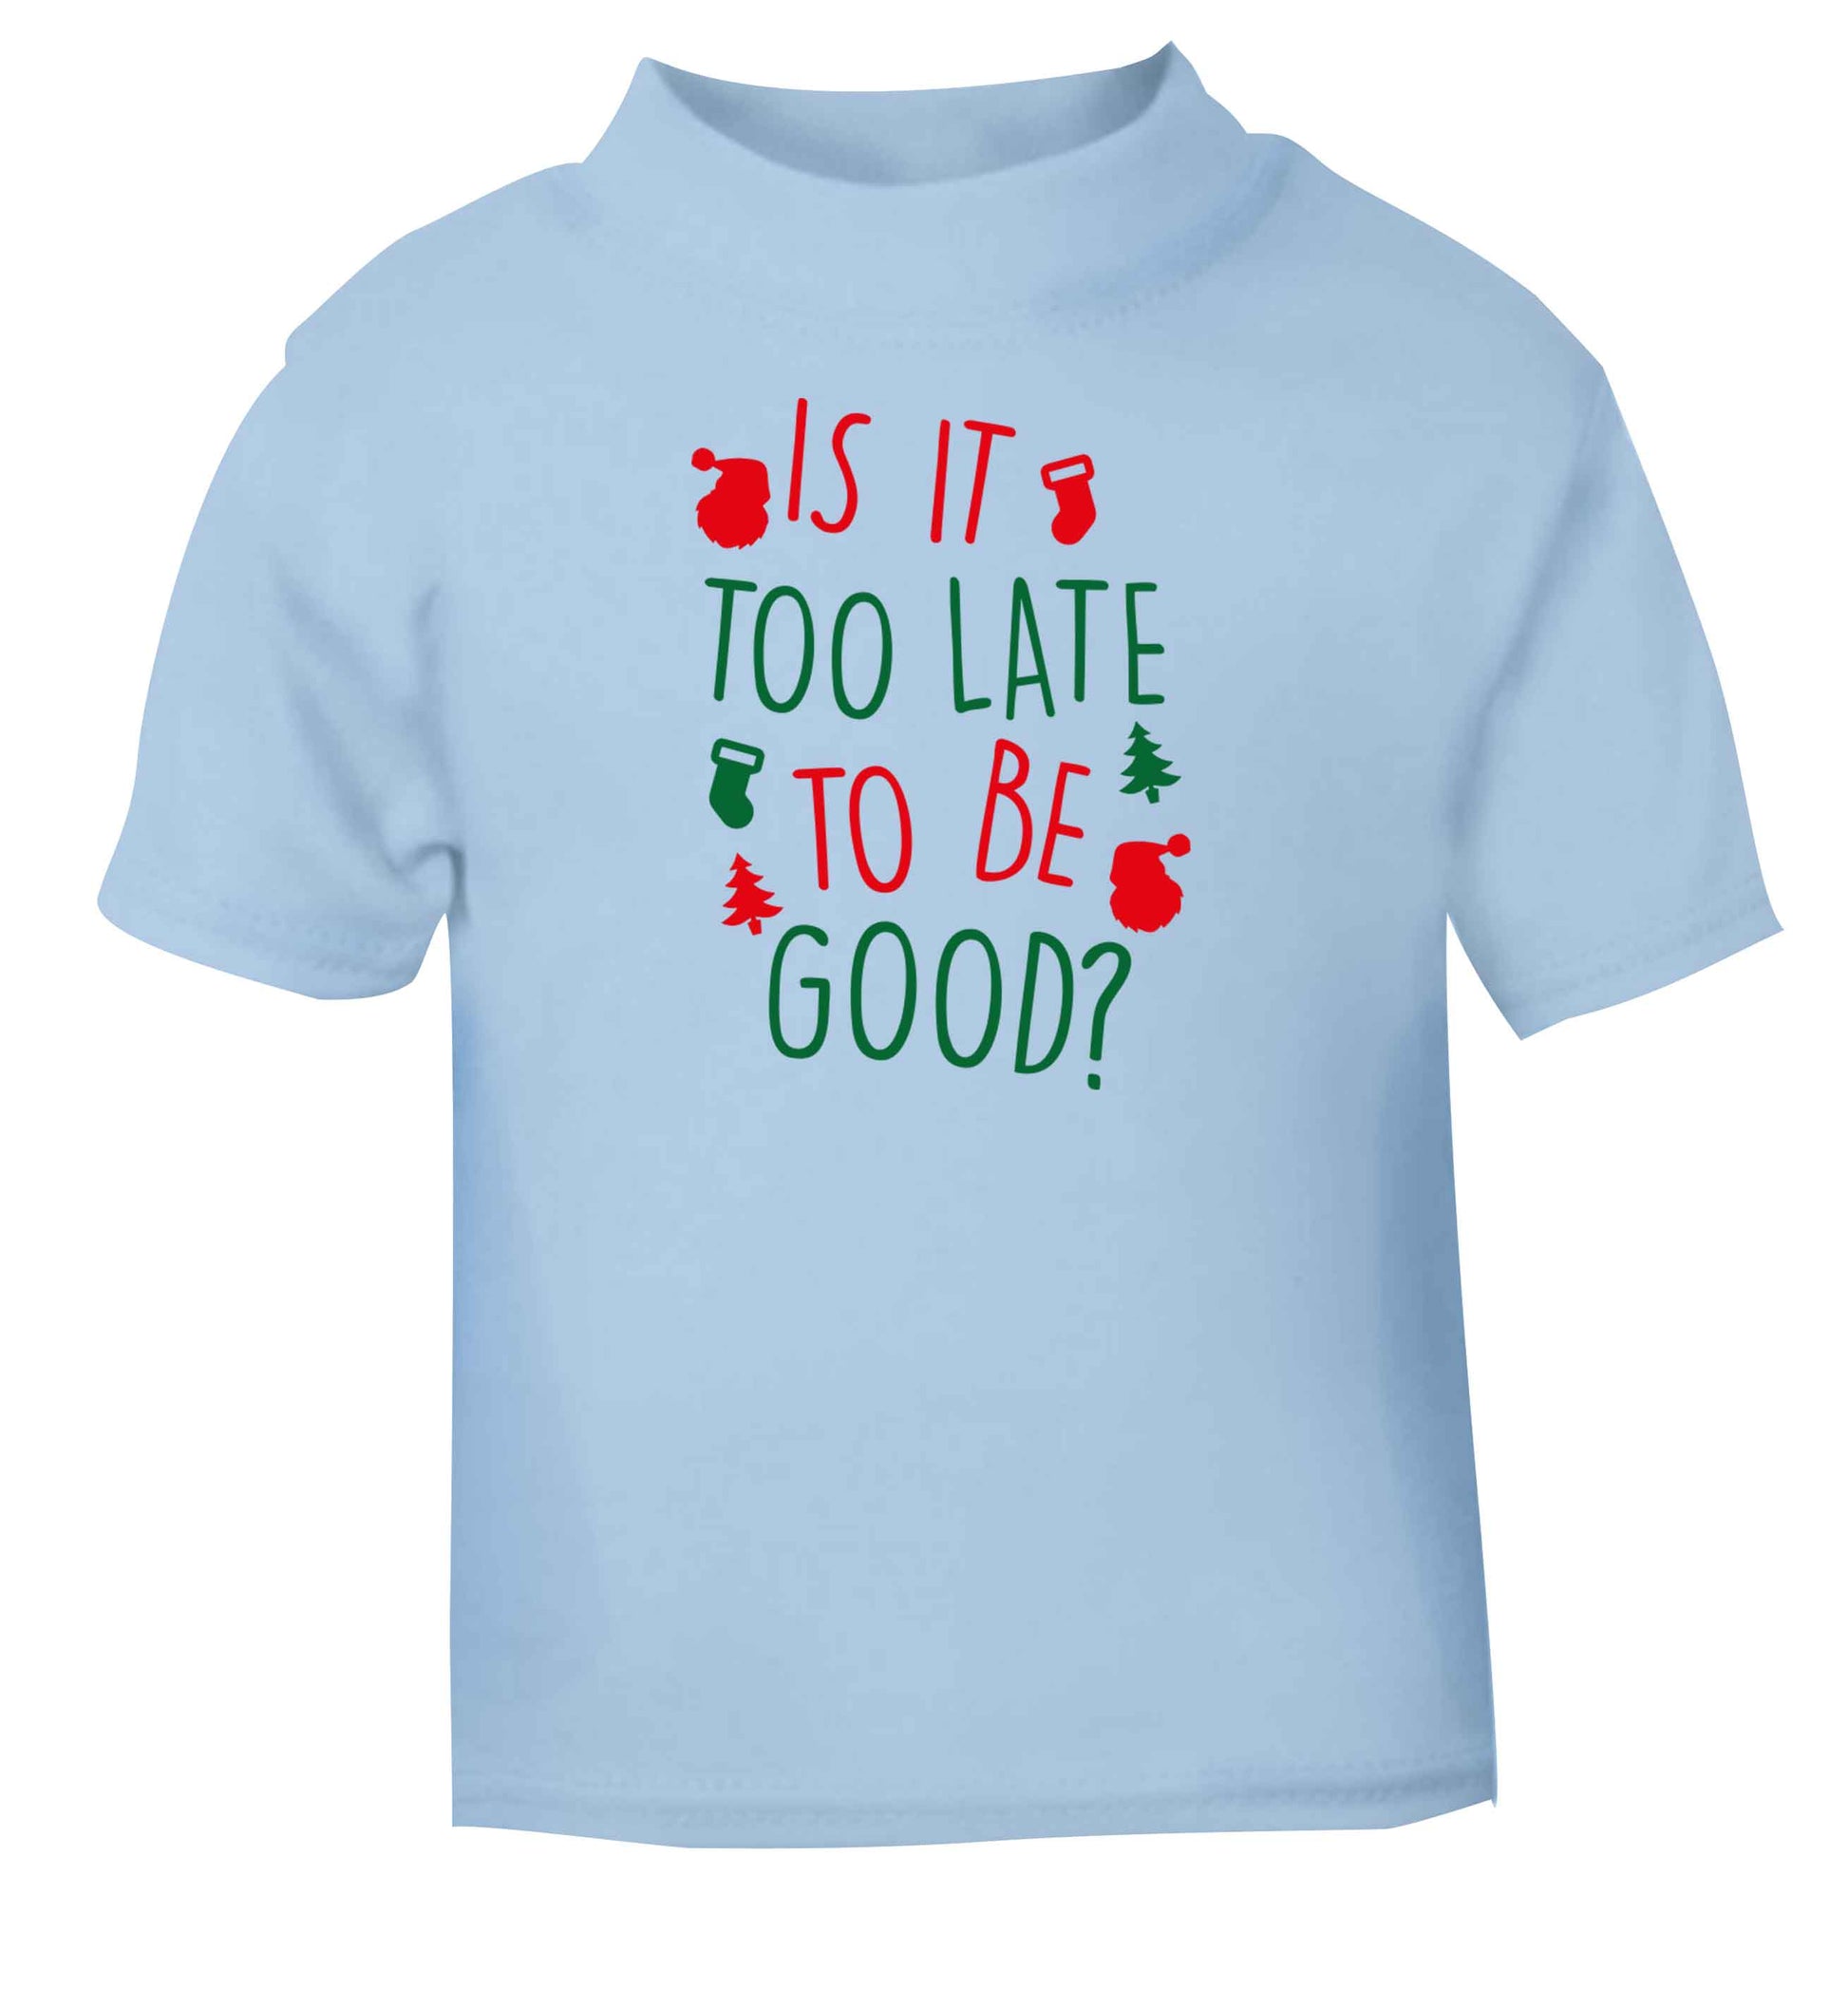 Too Late to be Good light blue baby toddler Tshirt 2 Years